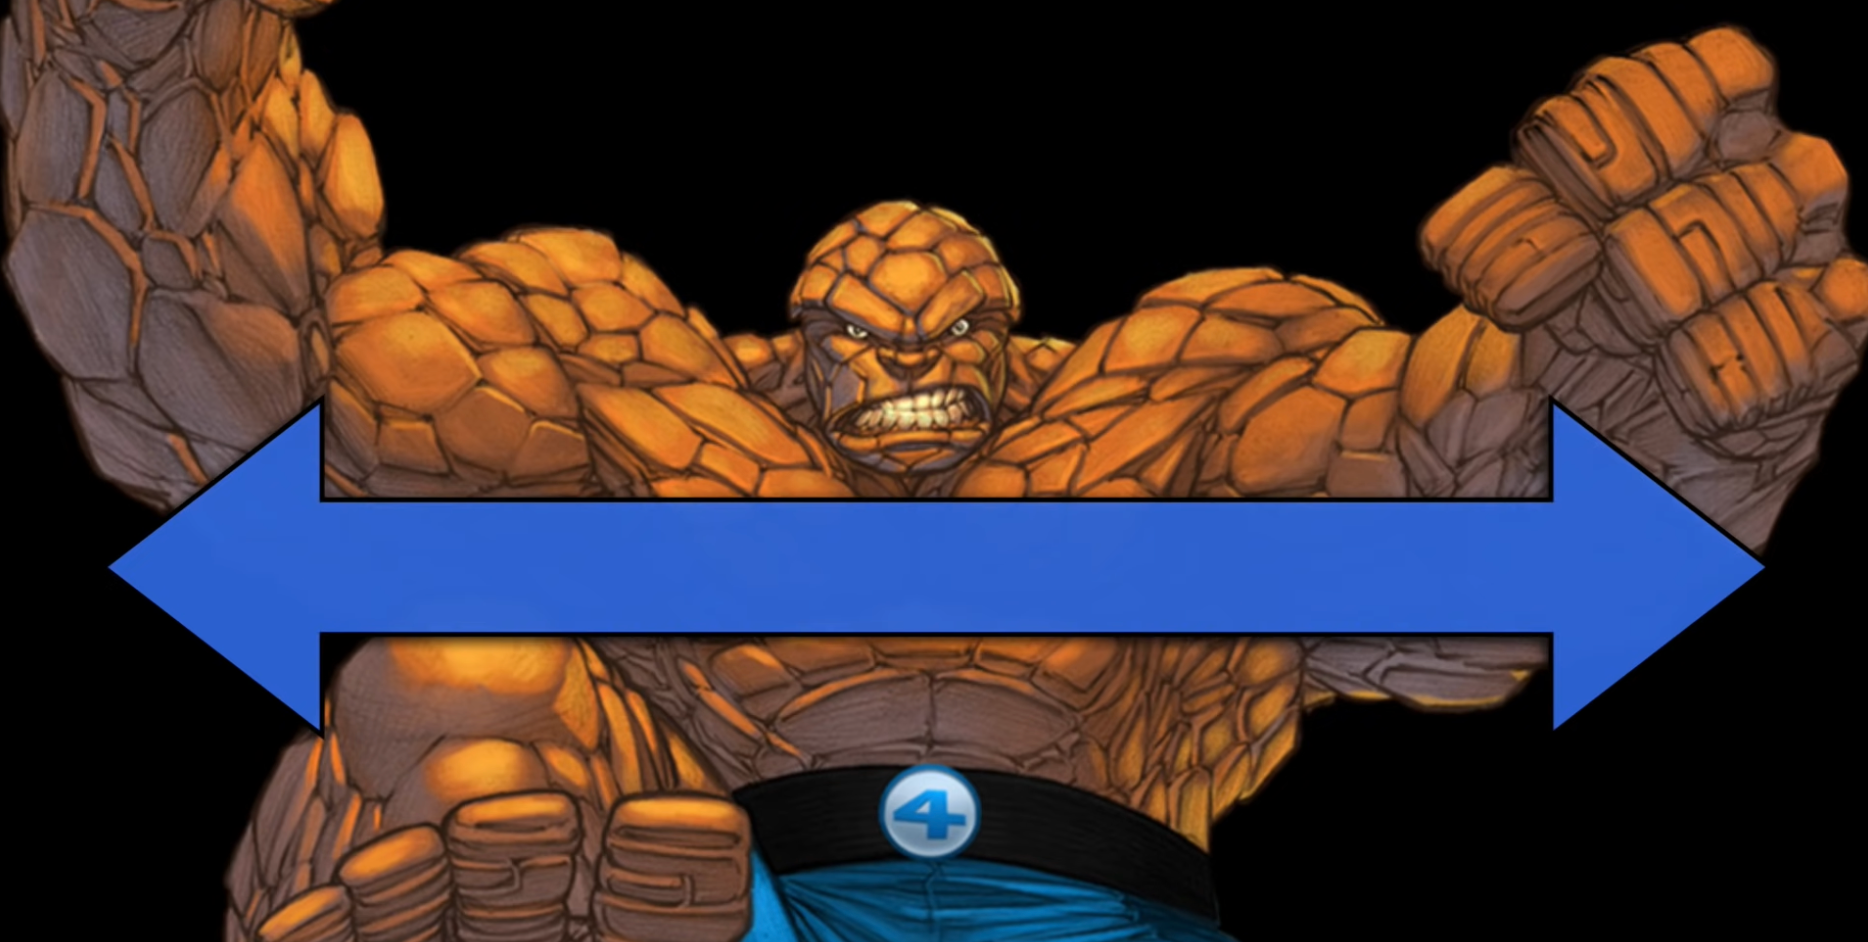 Image depicting Marvel superhero The Thing (who is very big) with an arrow spanning its torso to represent a topic that is too broad.